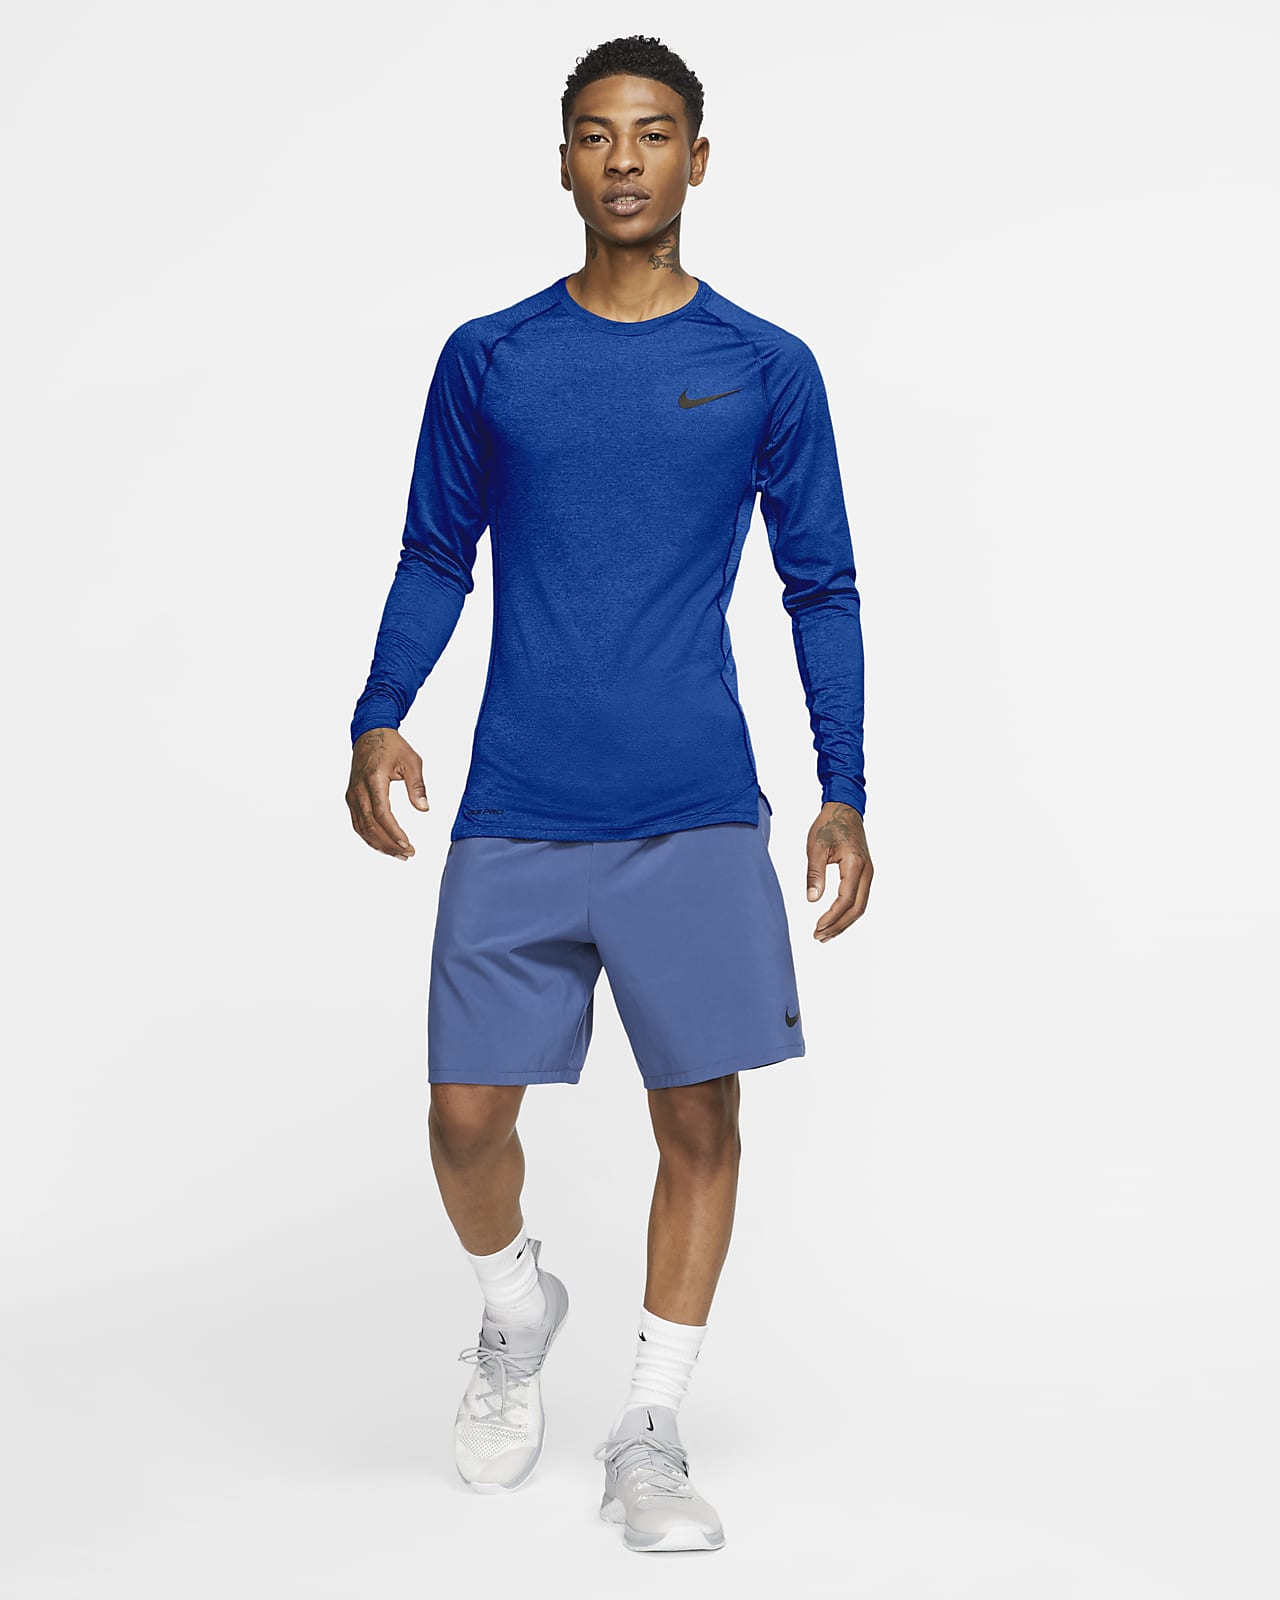 nike tight fit long sleeve